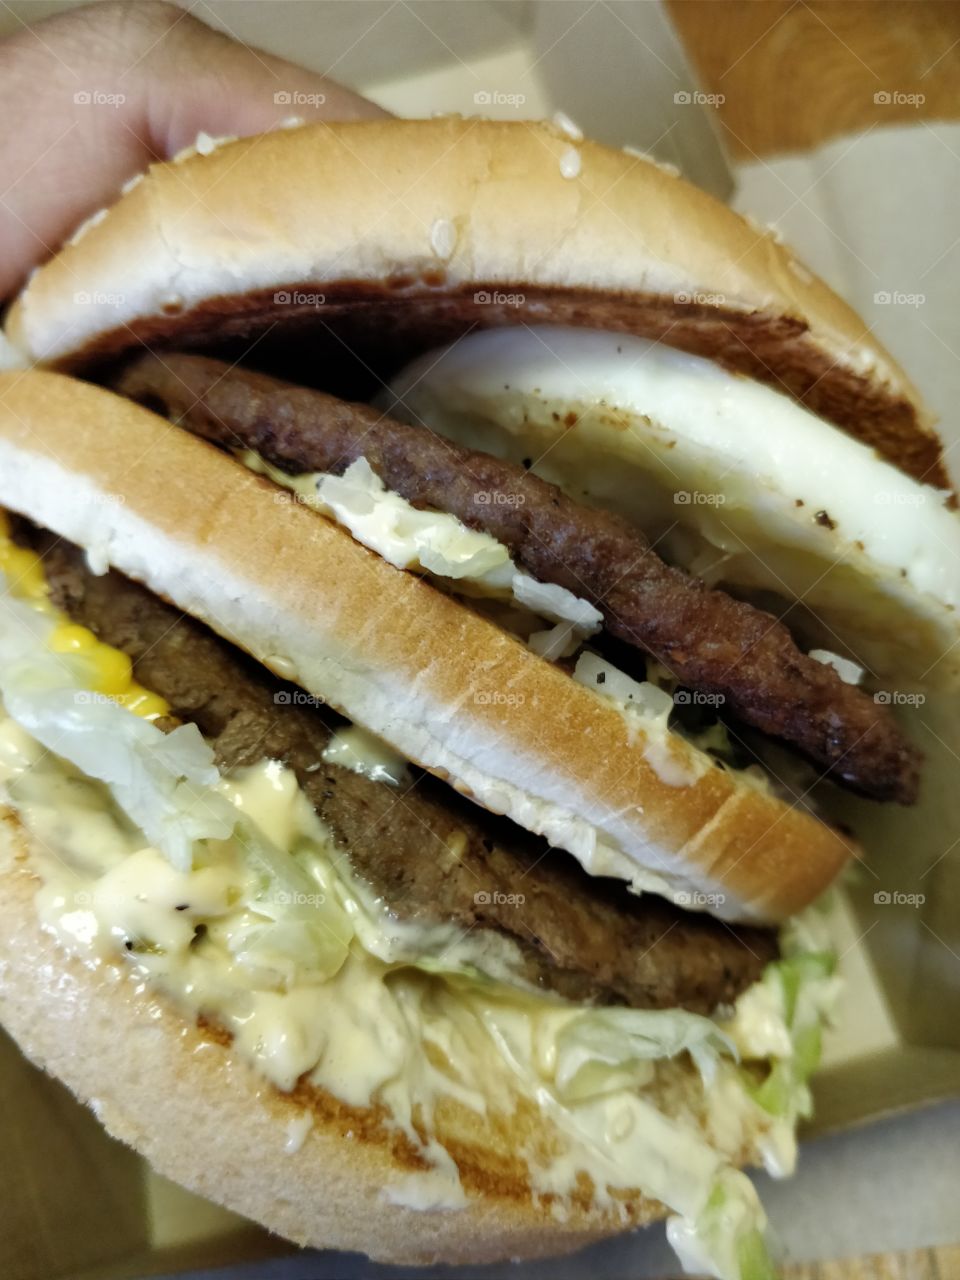 Grand Mac with Egg